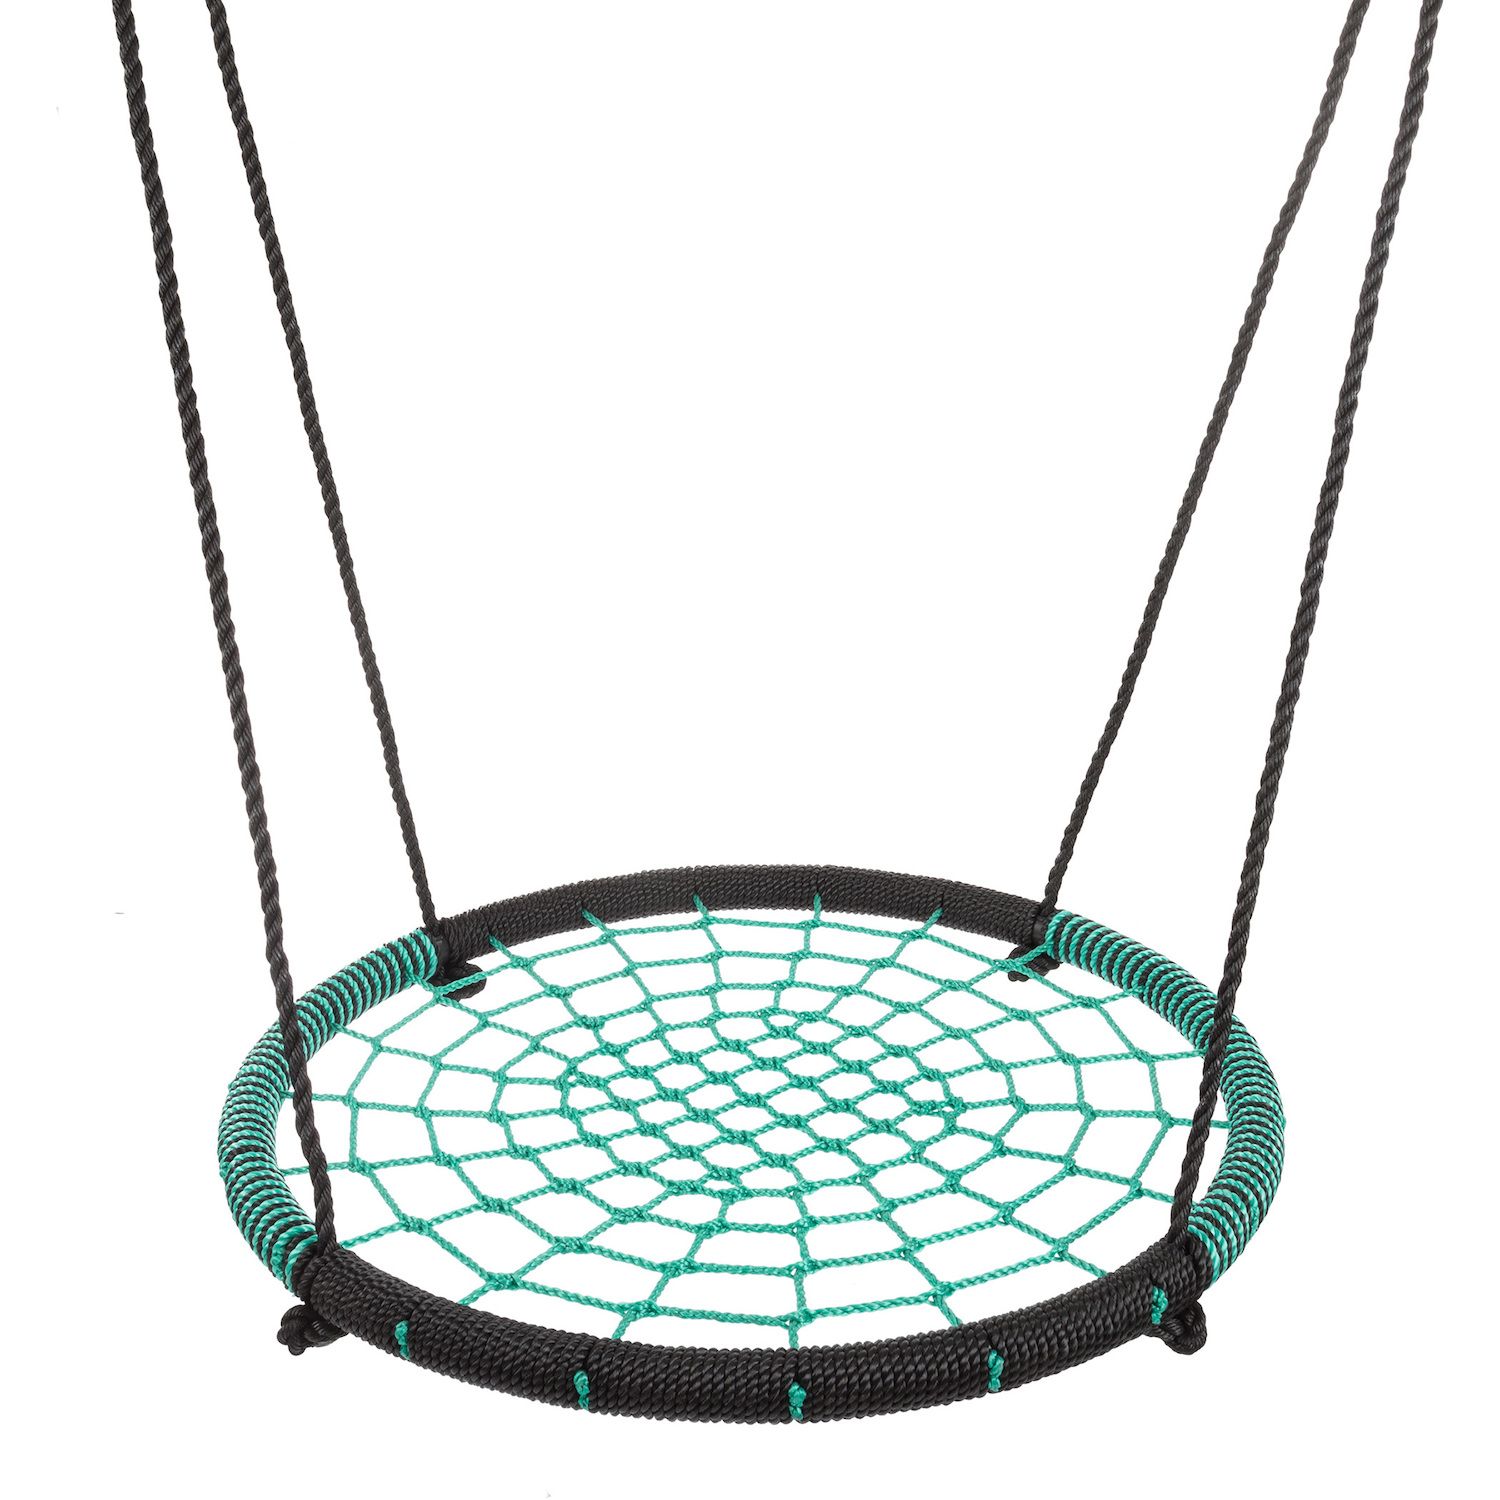 Image for Hey! Play! Spider Web 40-inch Diameter Hanging Tree Rope Saucer Seat at Kohl's.